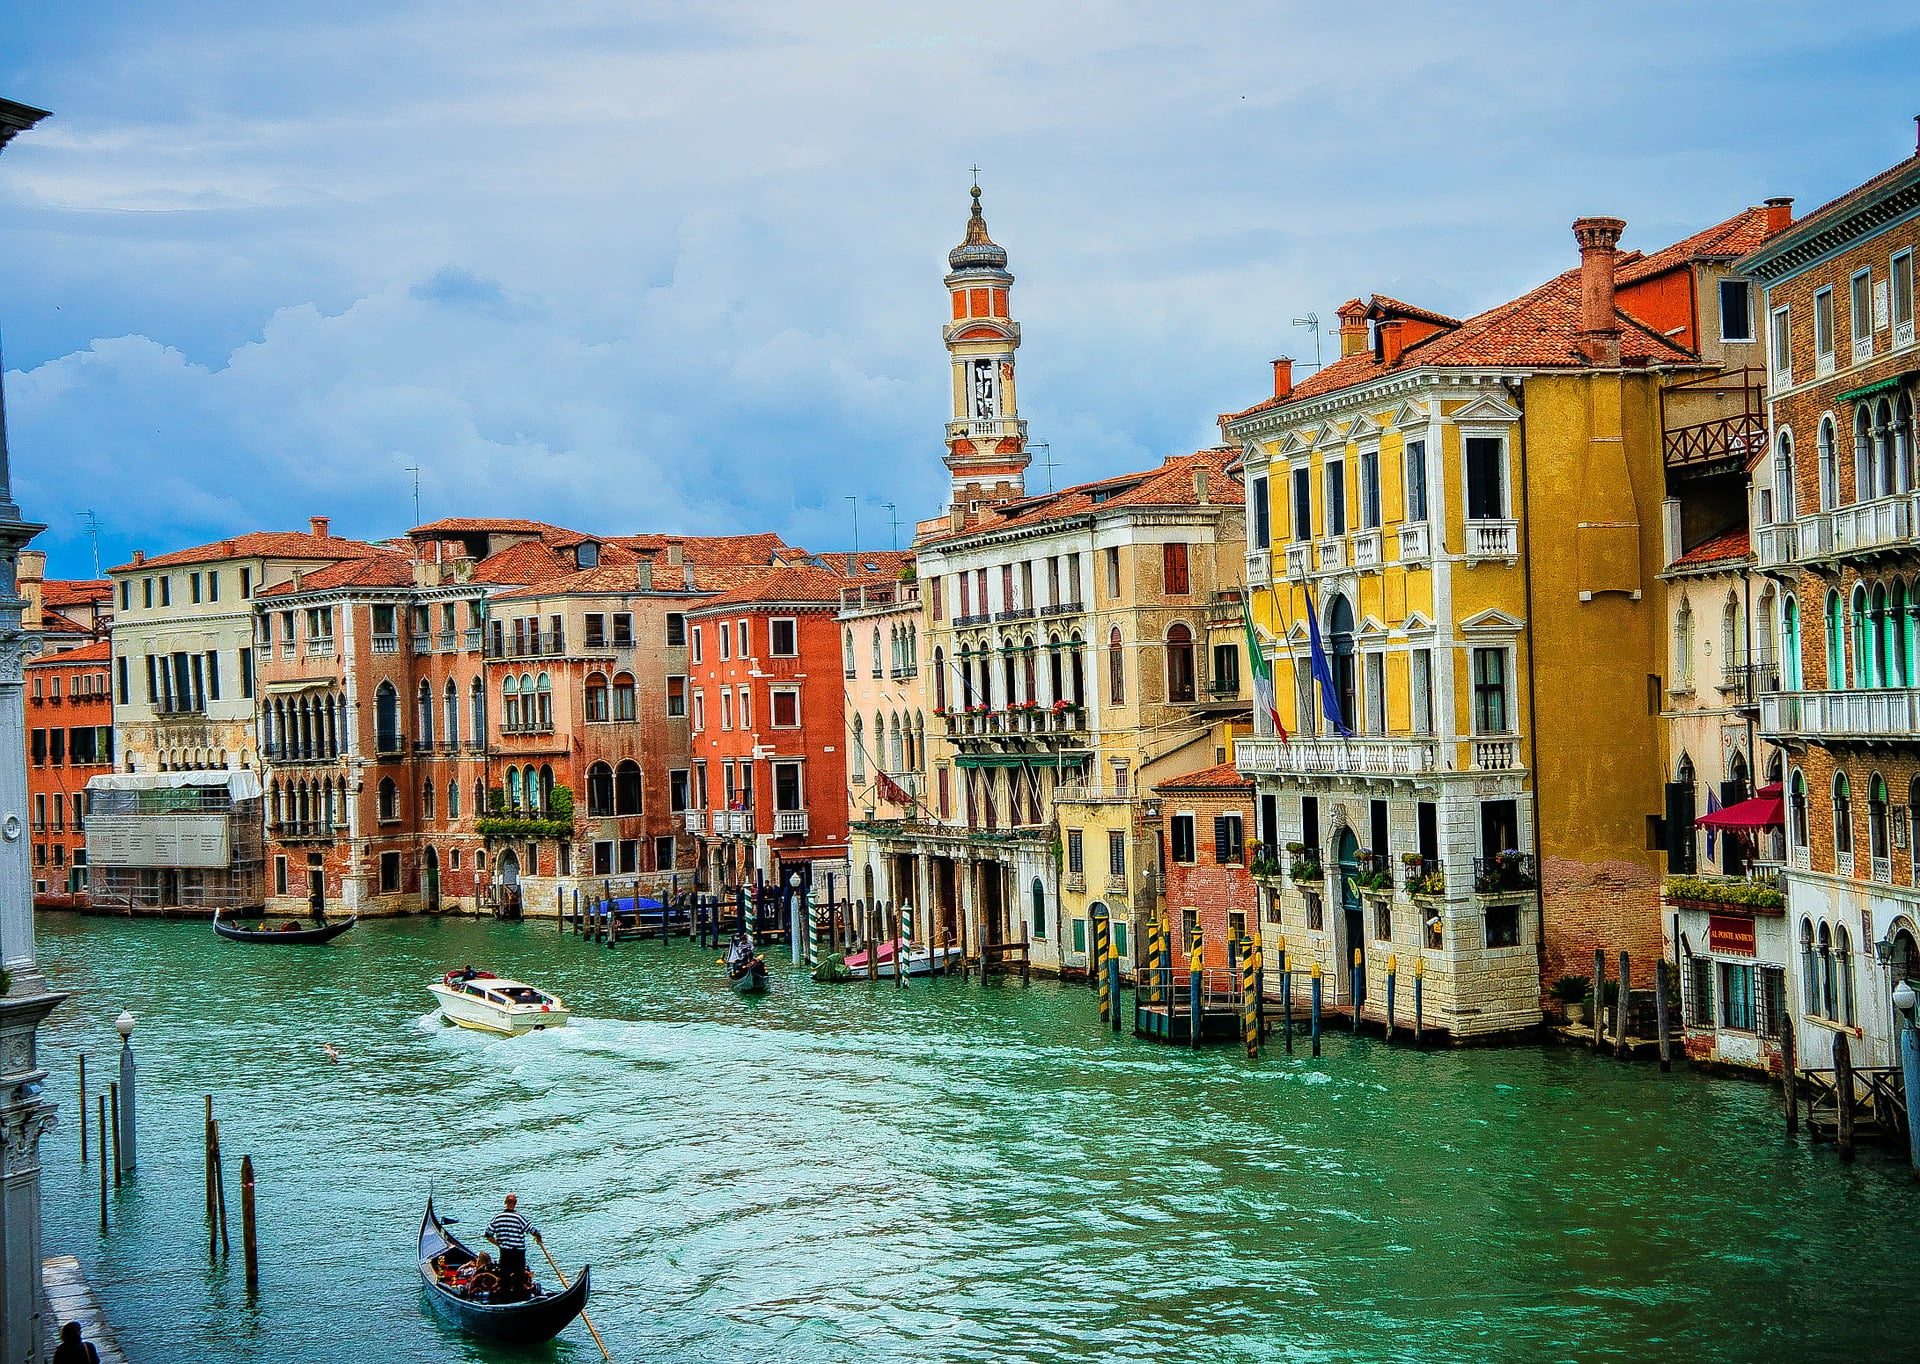 Venice - photo by Michelle Maria from Pixabay under Pixabay License